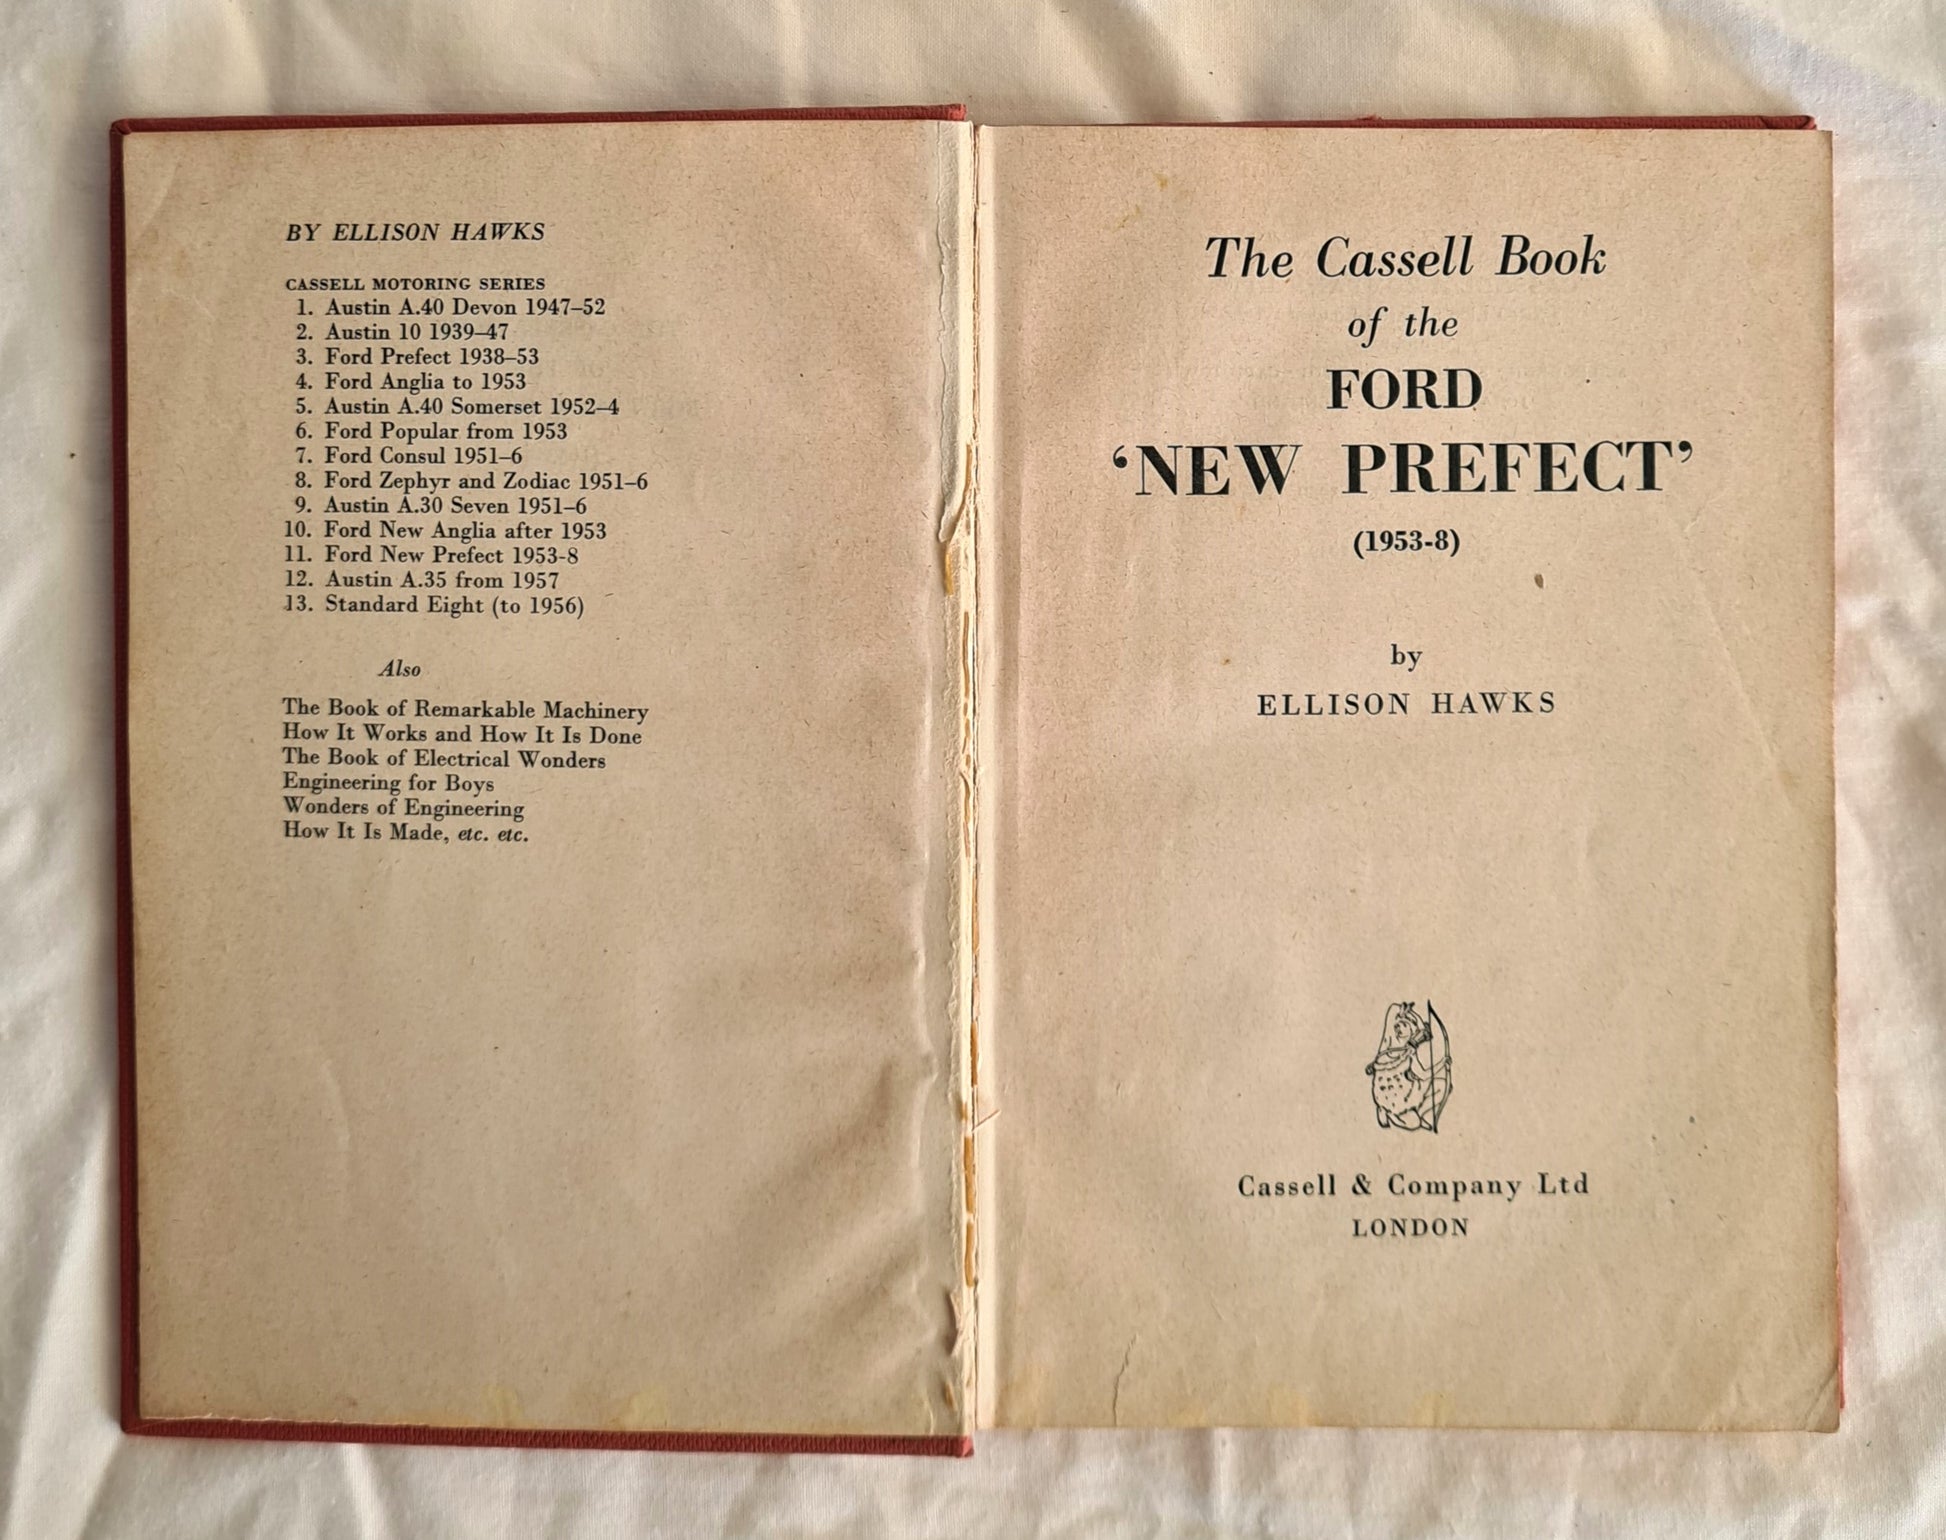 The Cassell Book of the Ford New Prefect (1953-8) by Ellison Hawks